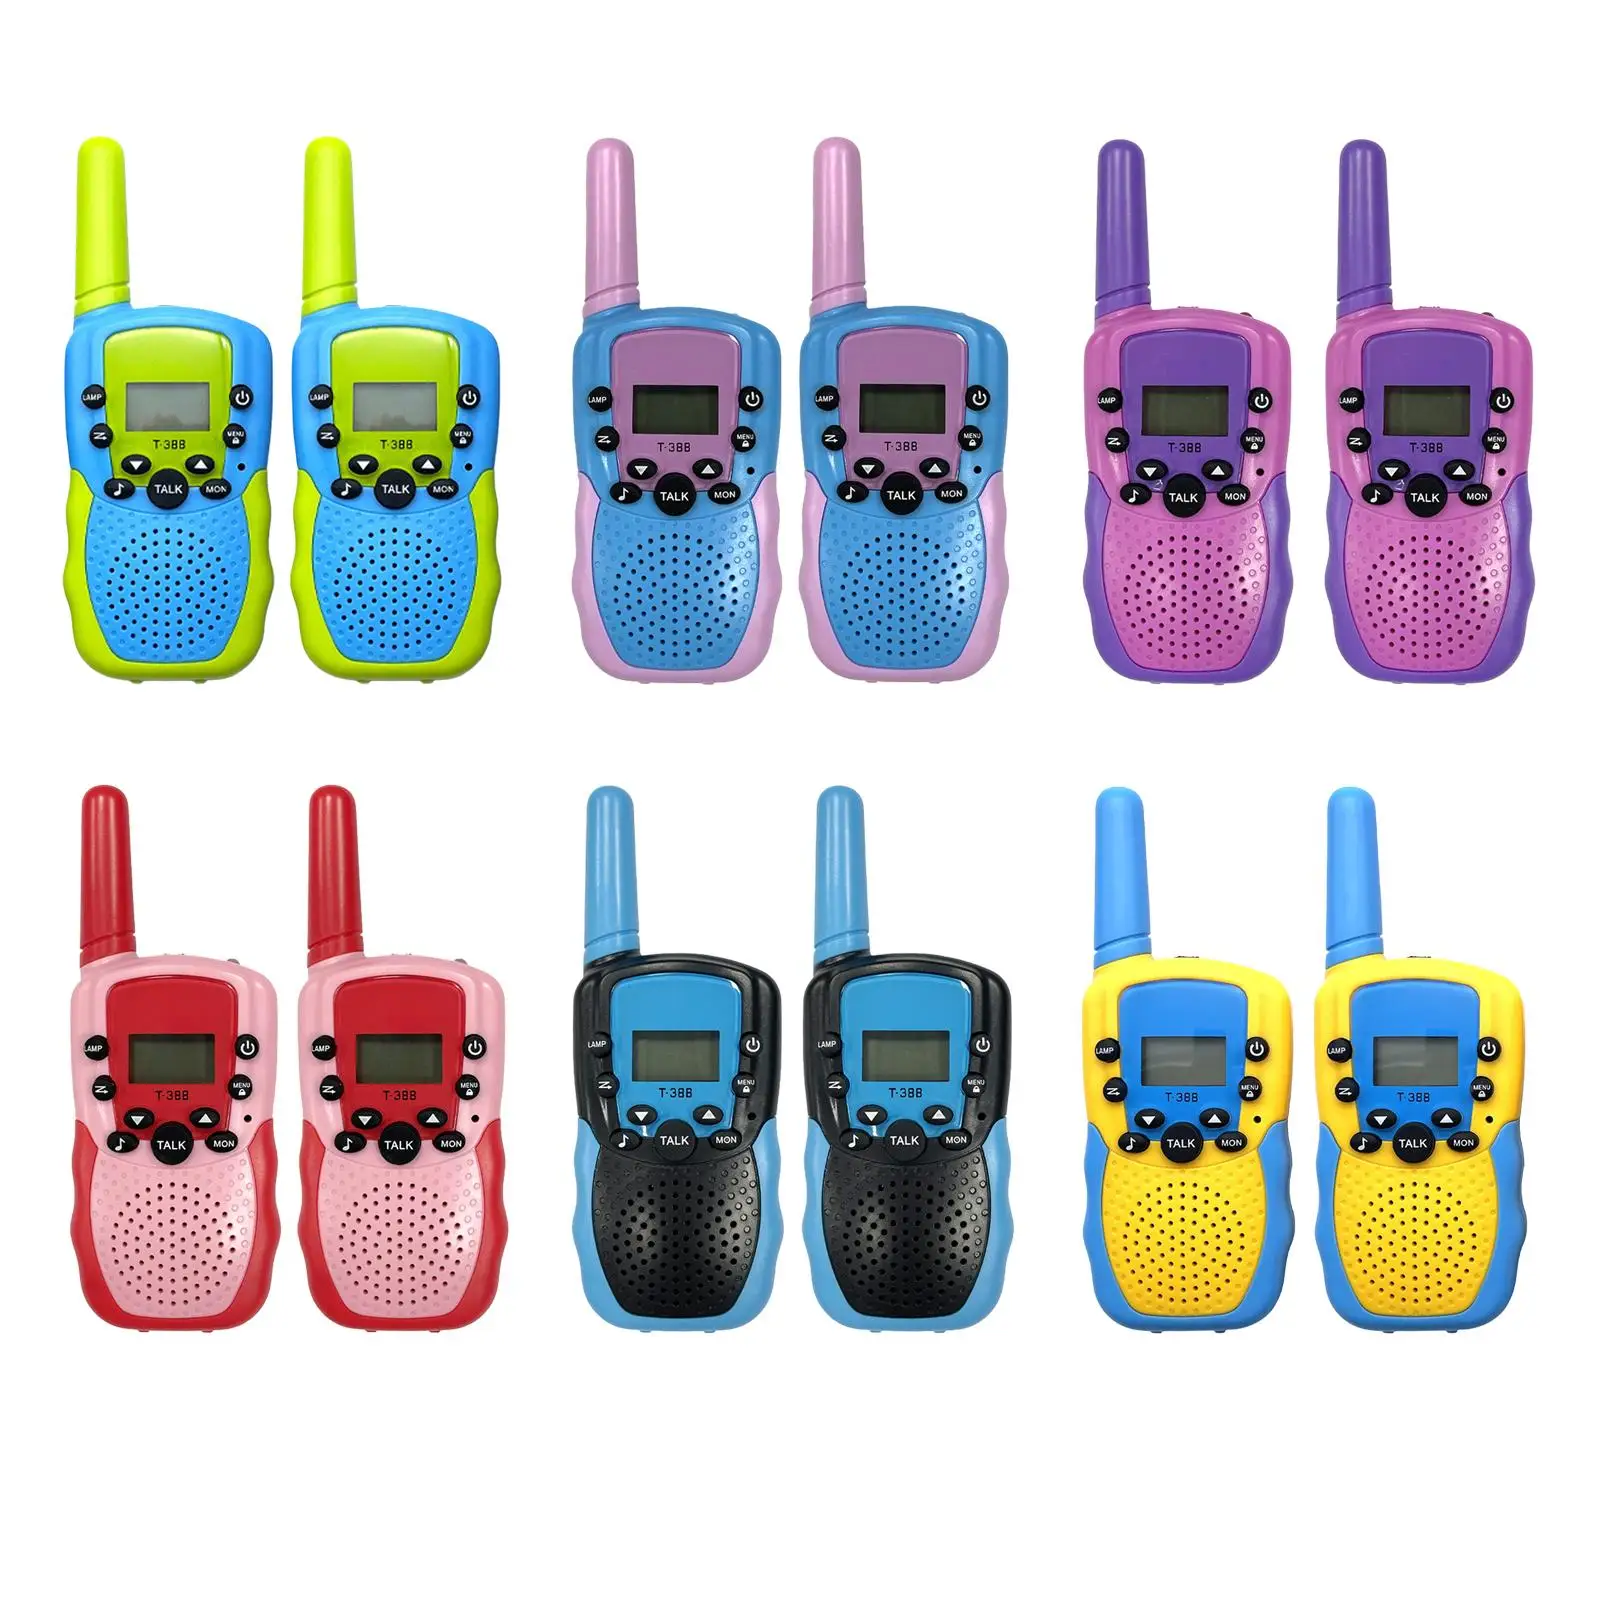 s for Kids 3km Range 2 Way Toys 9 Channels Birthday Gift for 3-12 Years Old Boys Girls Outside Outdoor Adventures